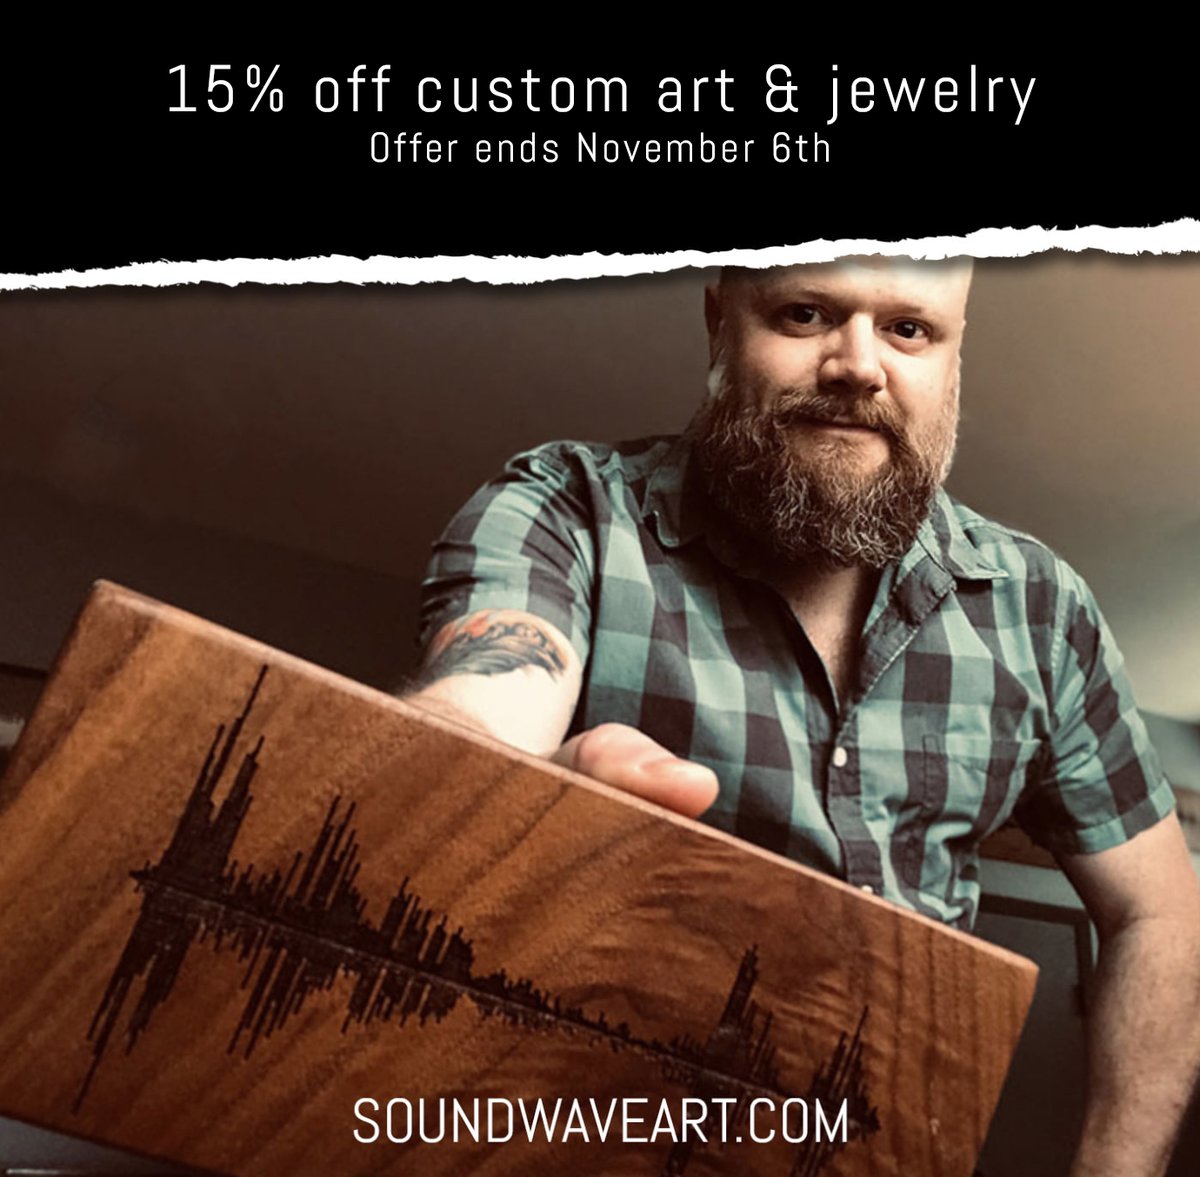 Shop Soundwaveart.com this week and get 15% off.
Use code NOV15 at checkout. Turn your voice into art.

#soundwaveart #soundwavejewelry #holidaygifts #sale